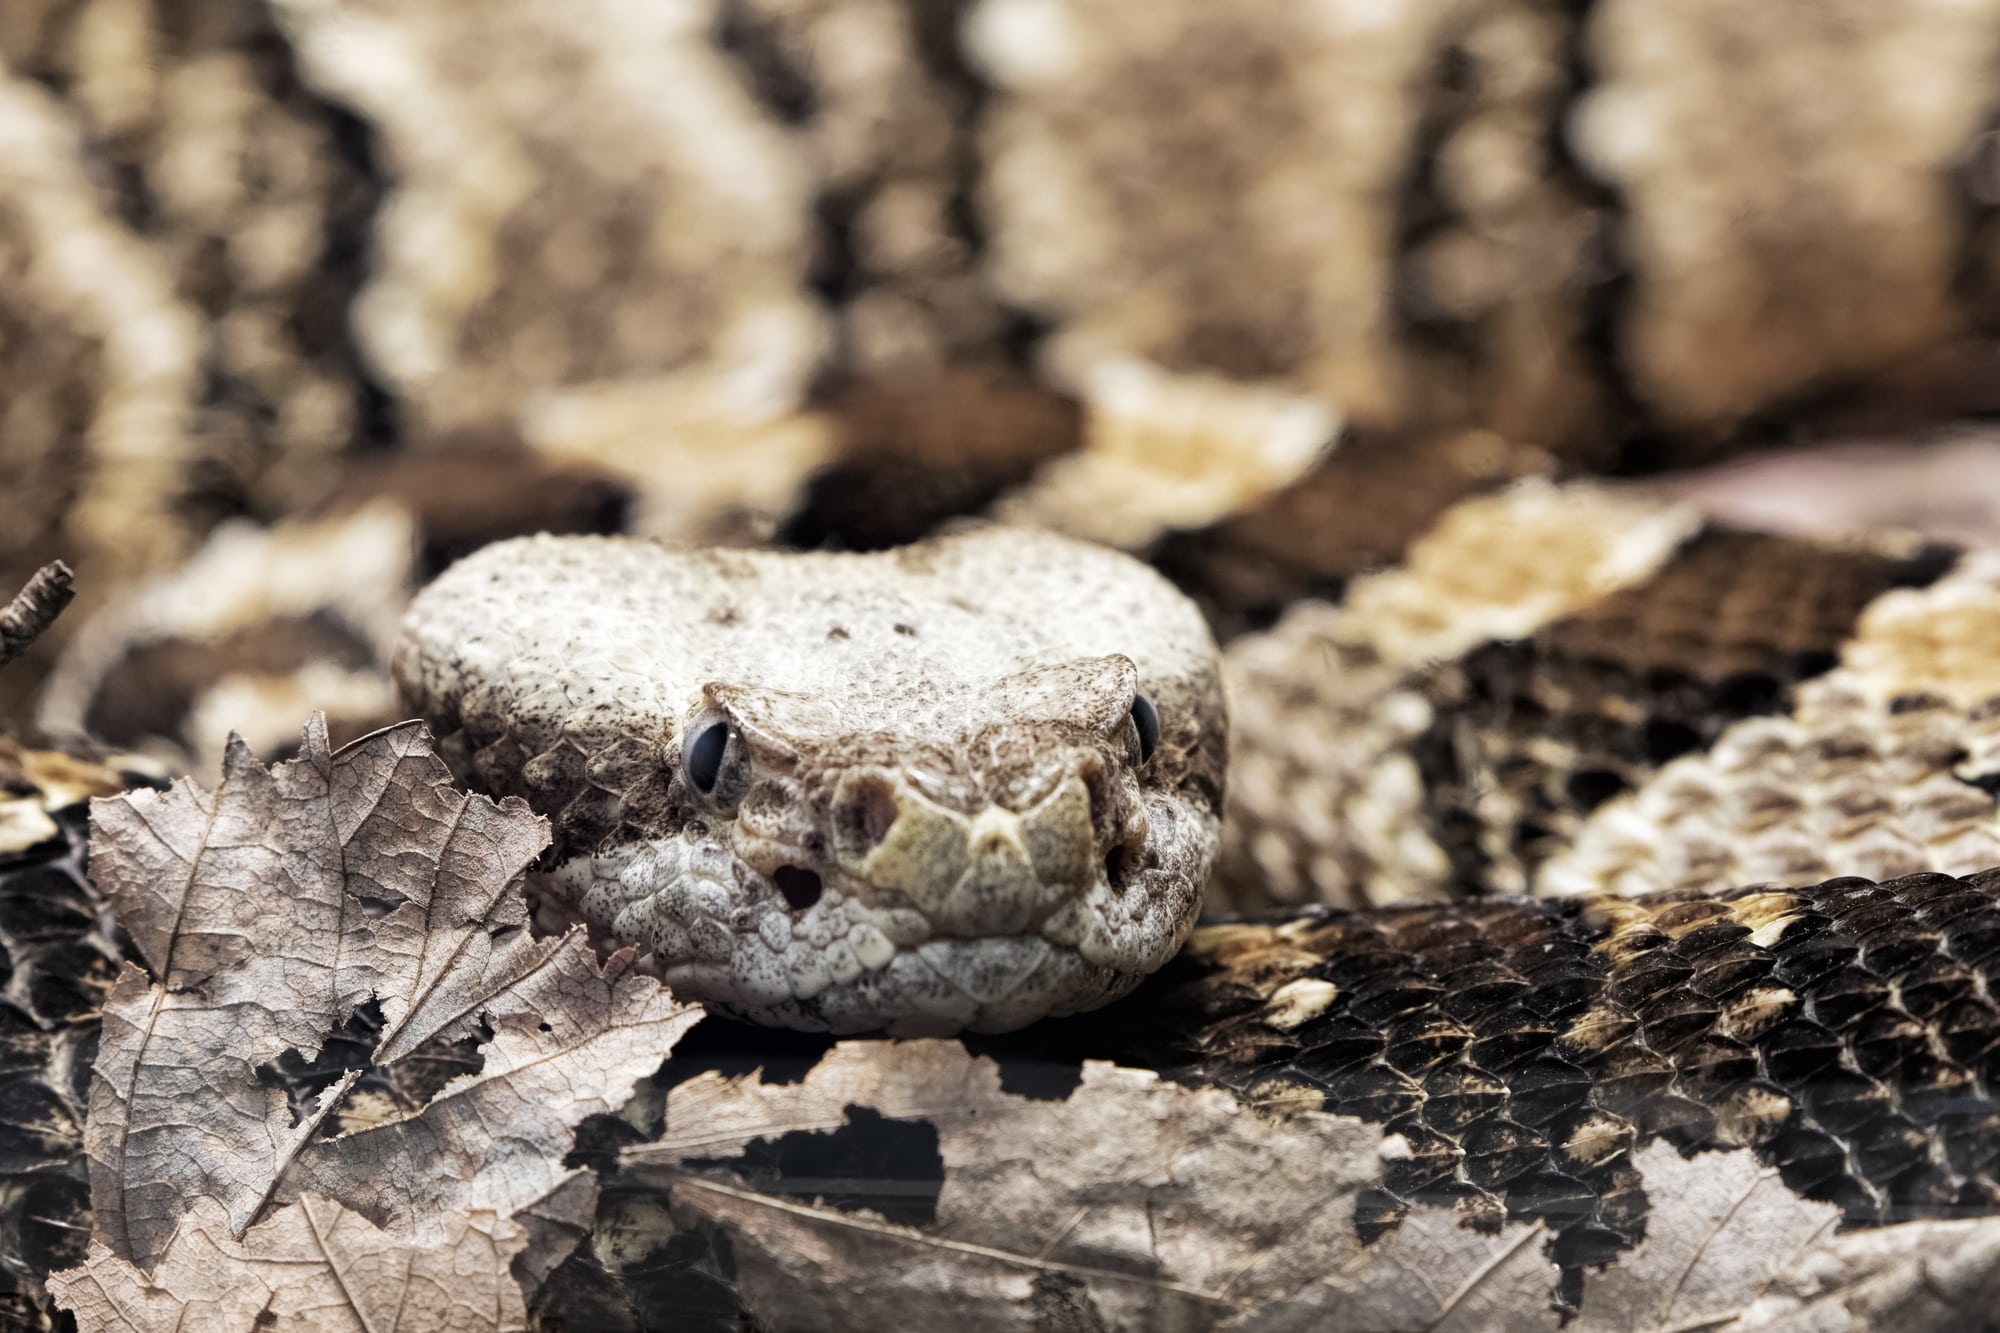 A timber rattlesnake on the forest floor